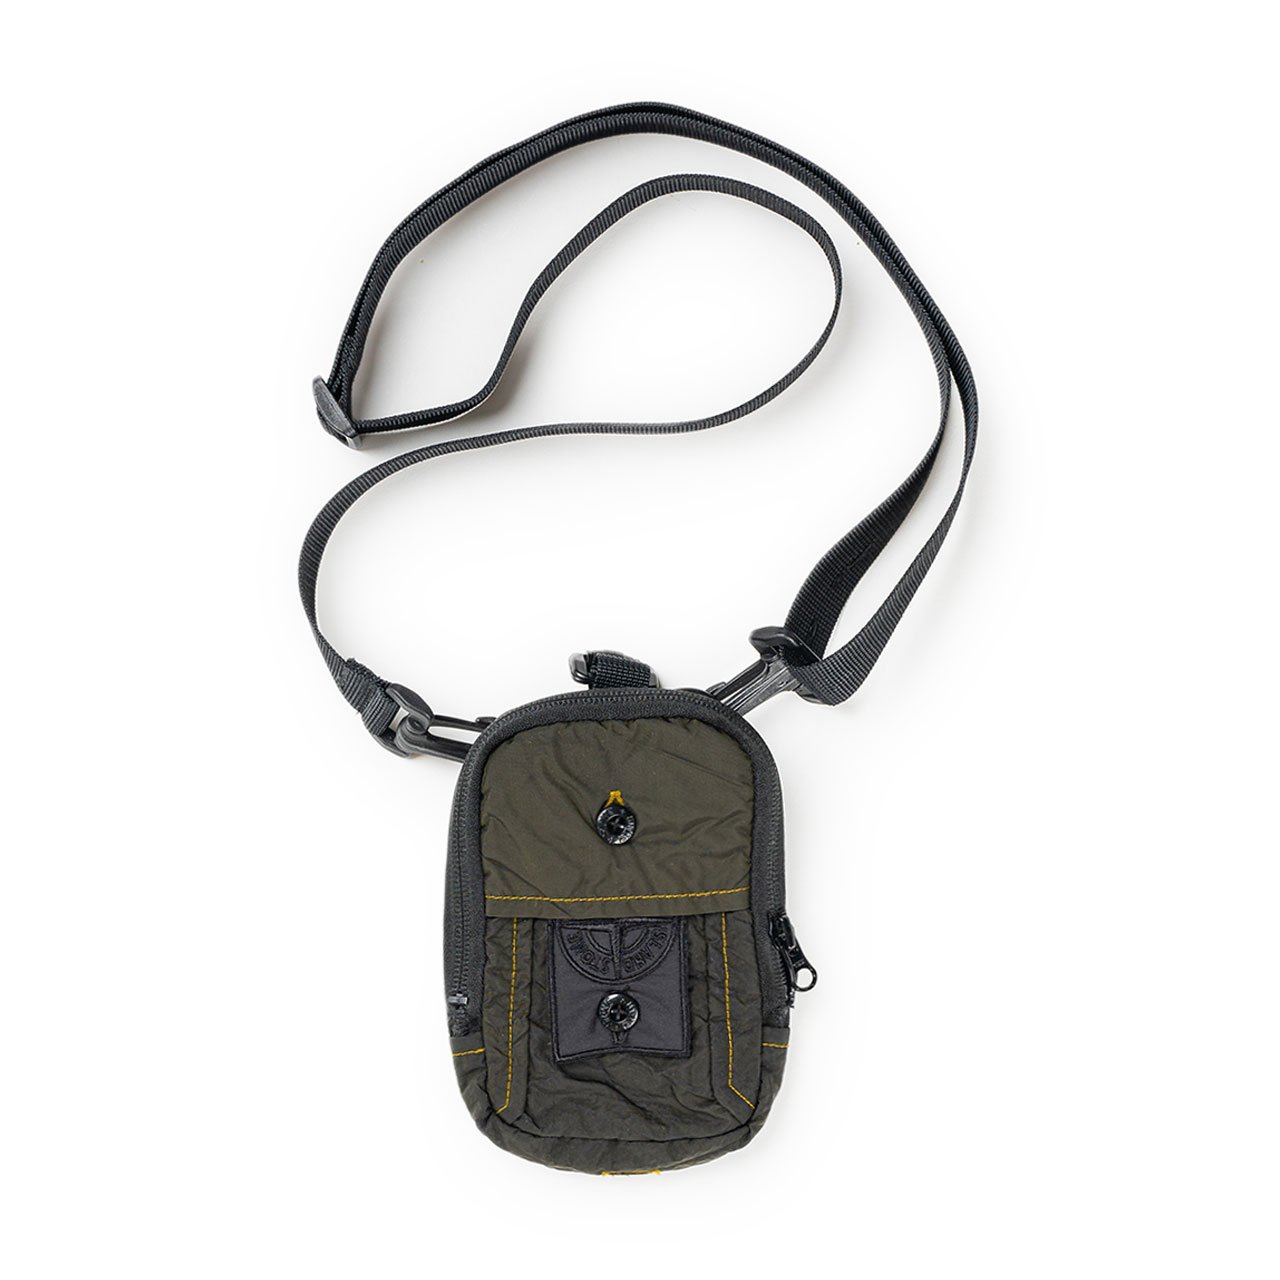 stone island shadow project compact pouch (olive / black) - 721990420.v0054 - a.plus - Image - 1